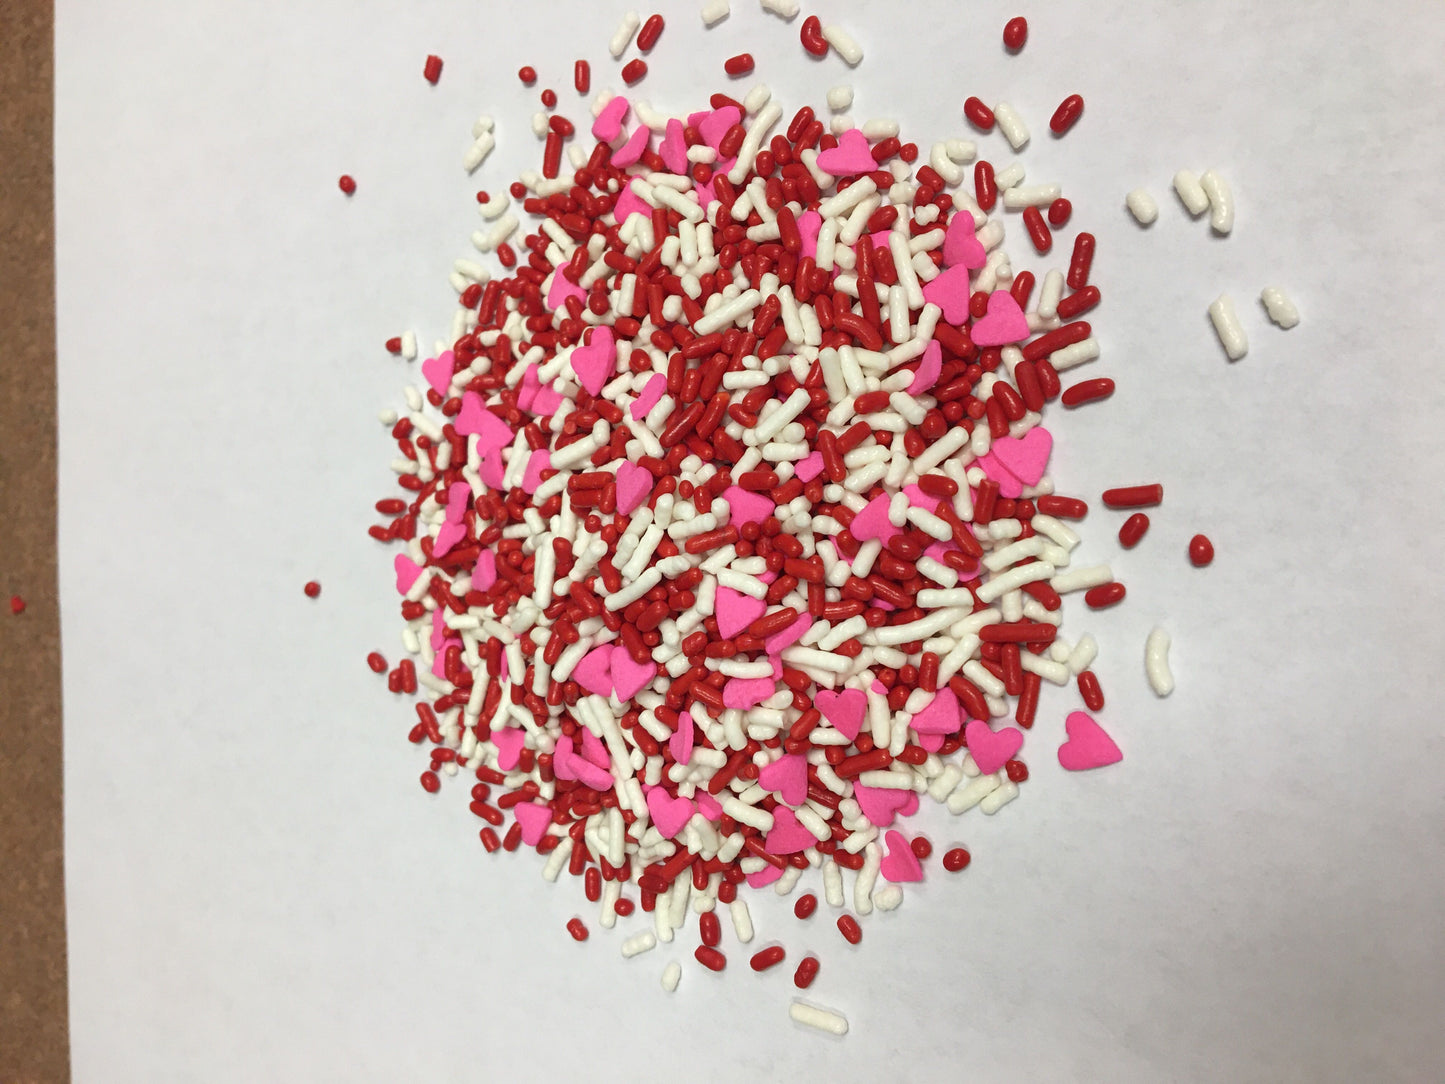 Sweetheart Mix Sprinkles